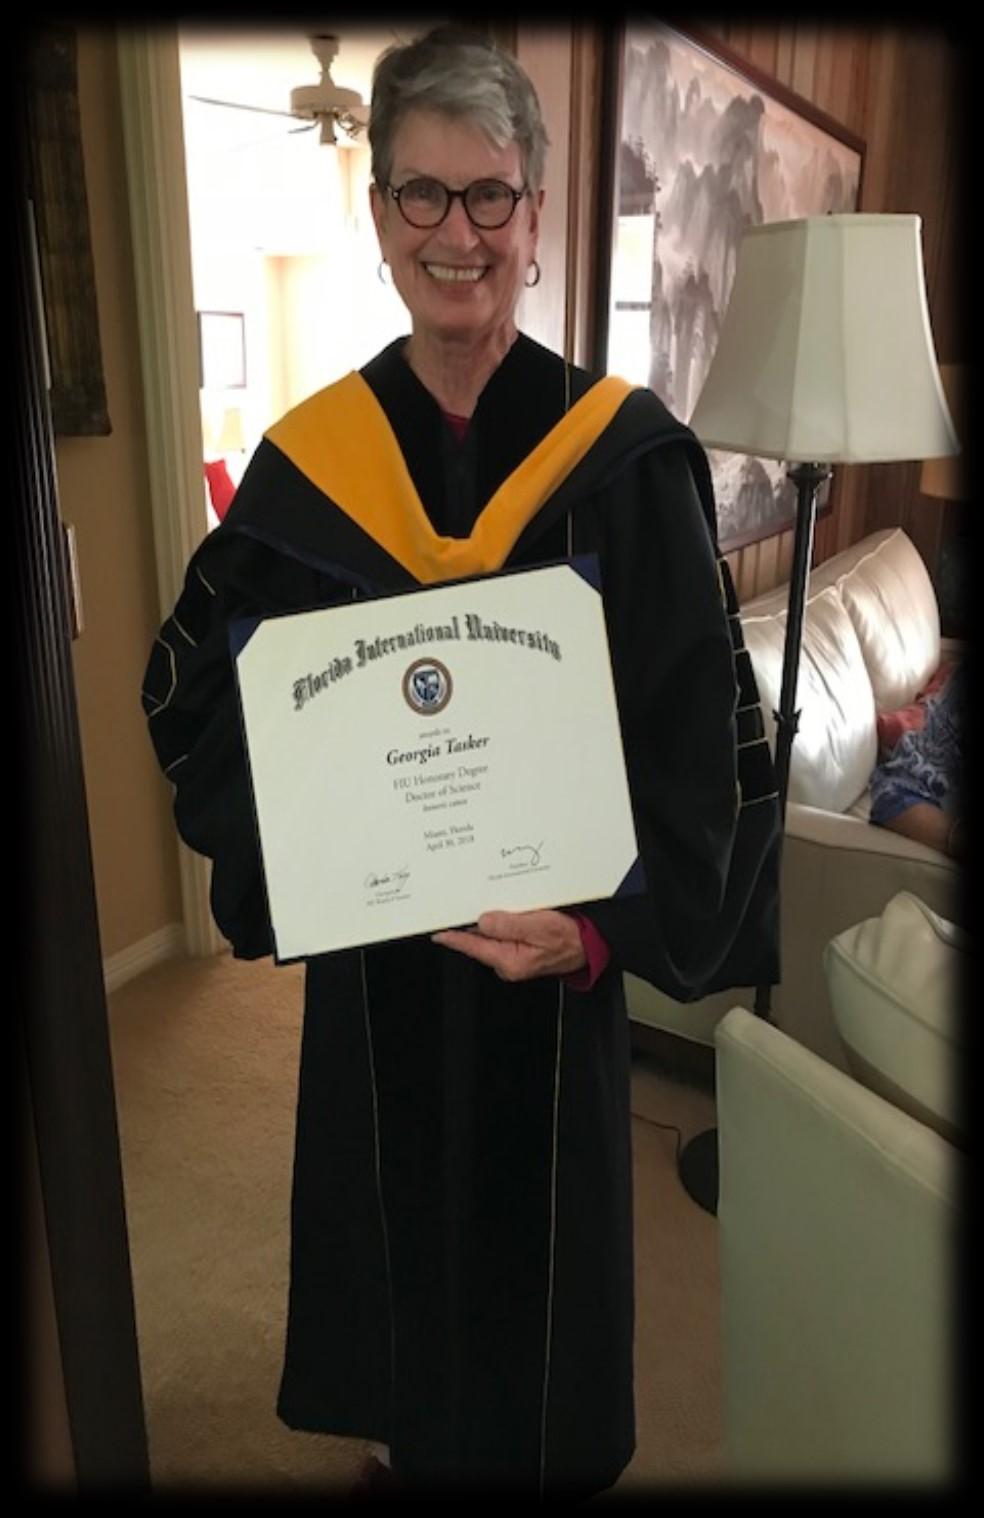 Congratulations Dr. Tasker Congratulations to Georgia Tasker who on April 30, 2018 was awarded an honorary doctorate in Science by Florida International University.